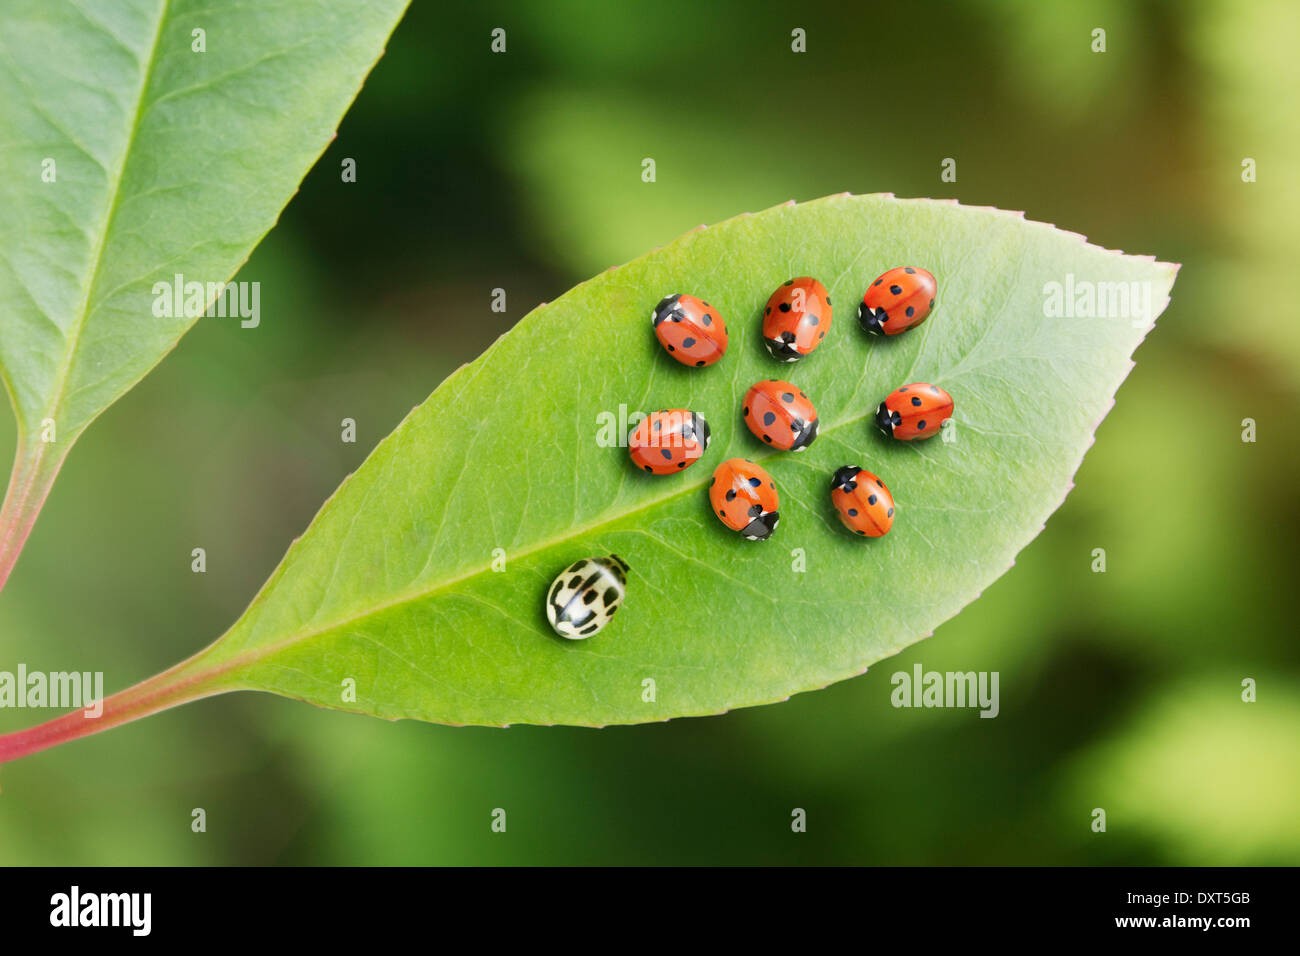 Unique ladybug standing out from the crowd on leaf Stock Photo